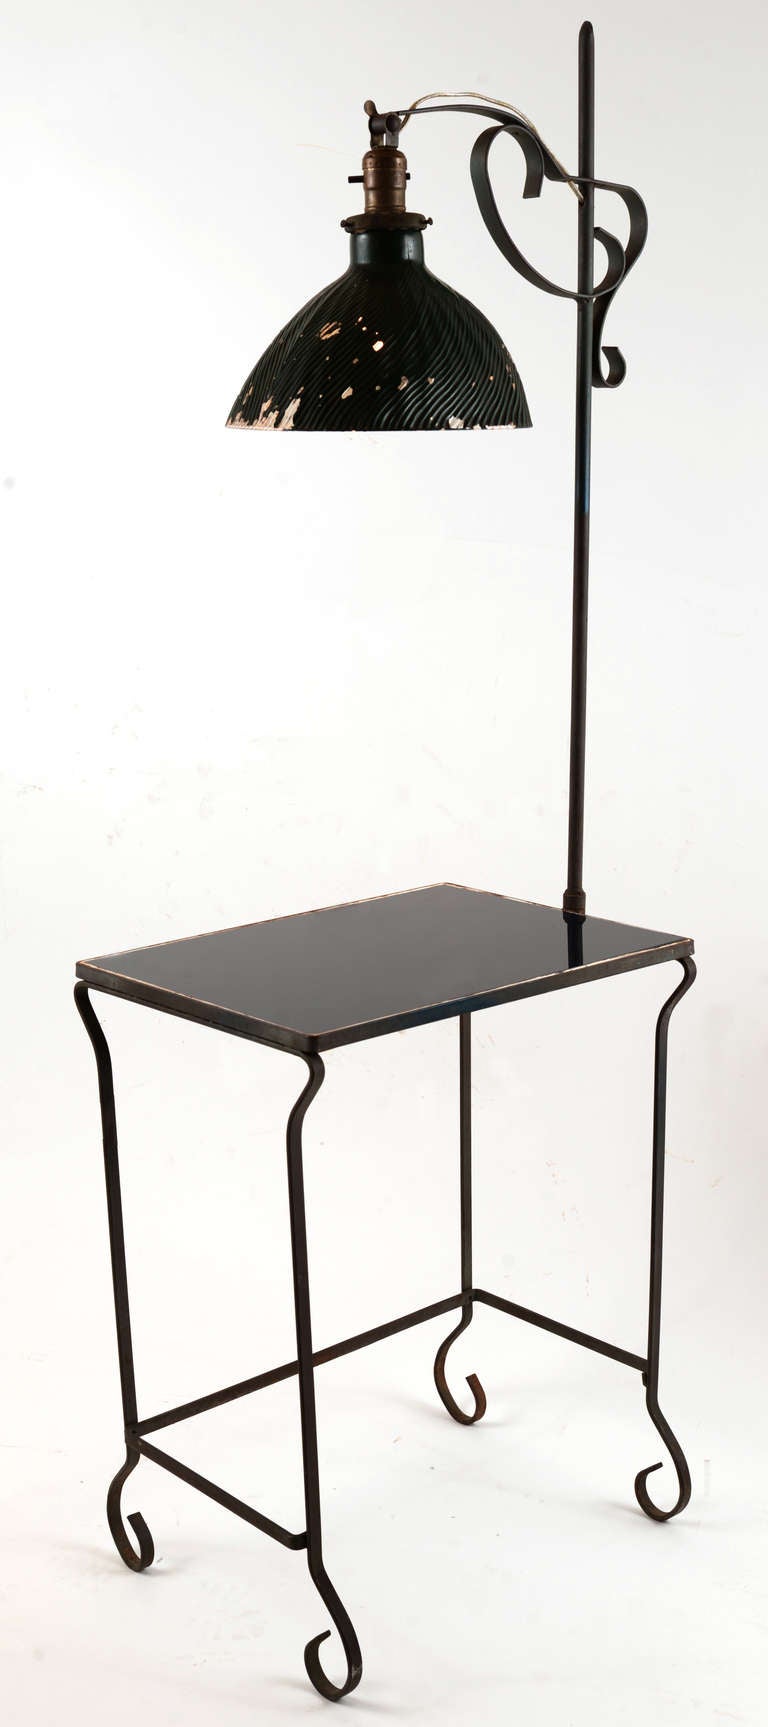 Simple, petite wrought iron and glass floor lamp side table combination in strap steel.  Lapis blue glass surface with a textured mercury glass reflector, our addition.